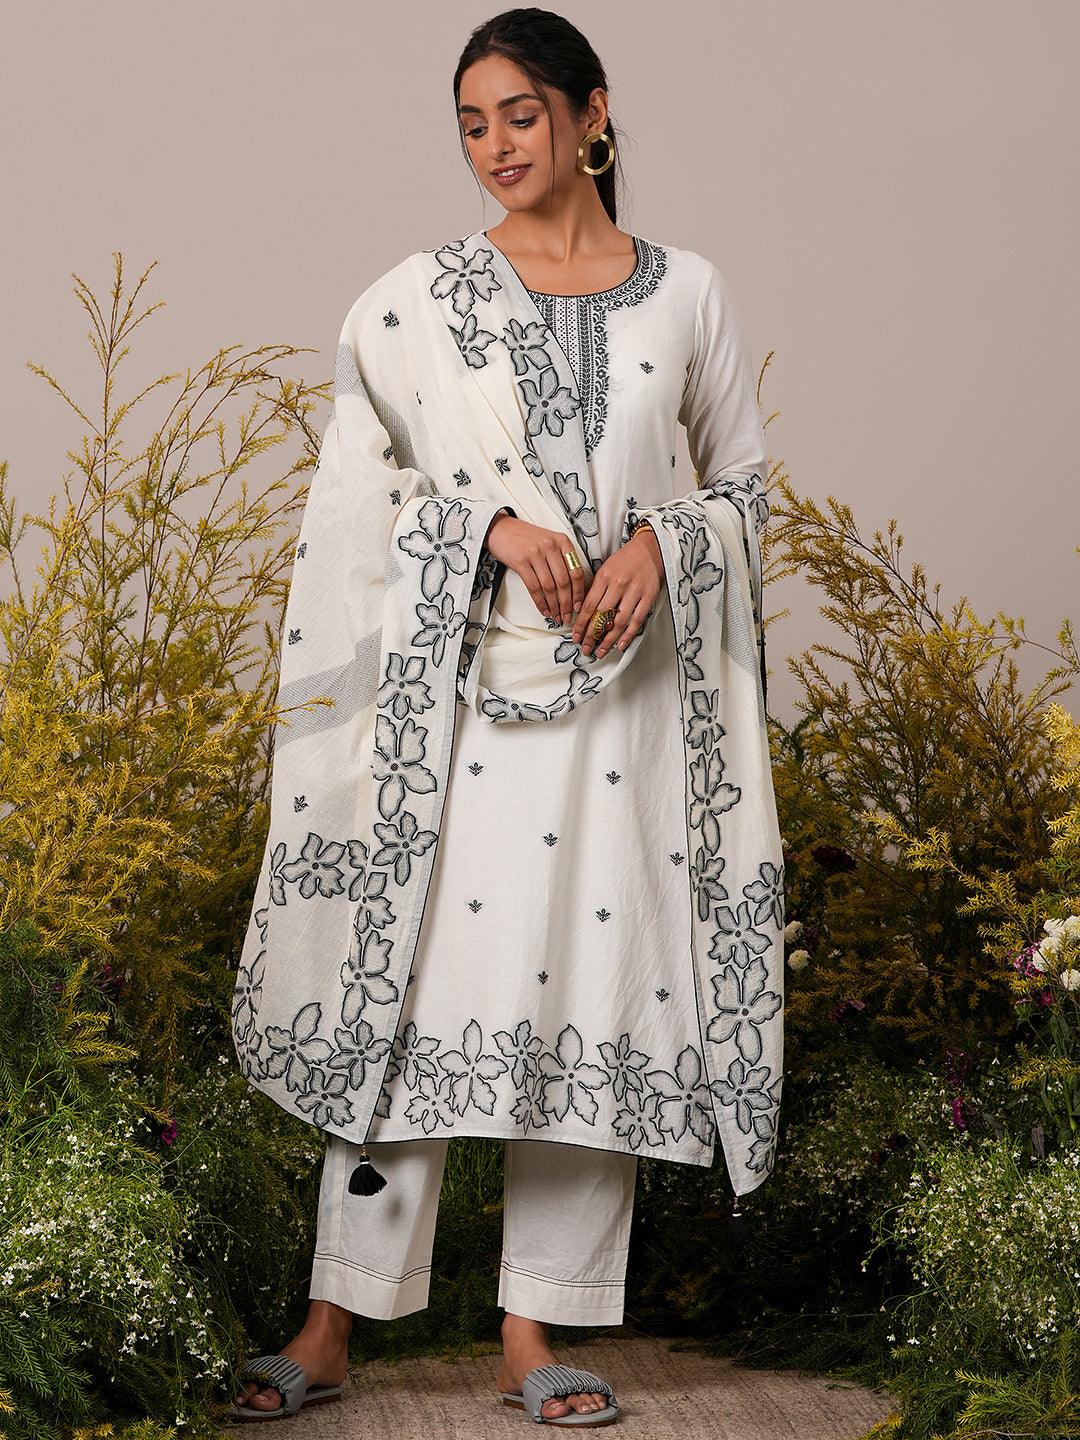 Off White Woven Design Cotton Straight Suit With Dupatta - Libas